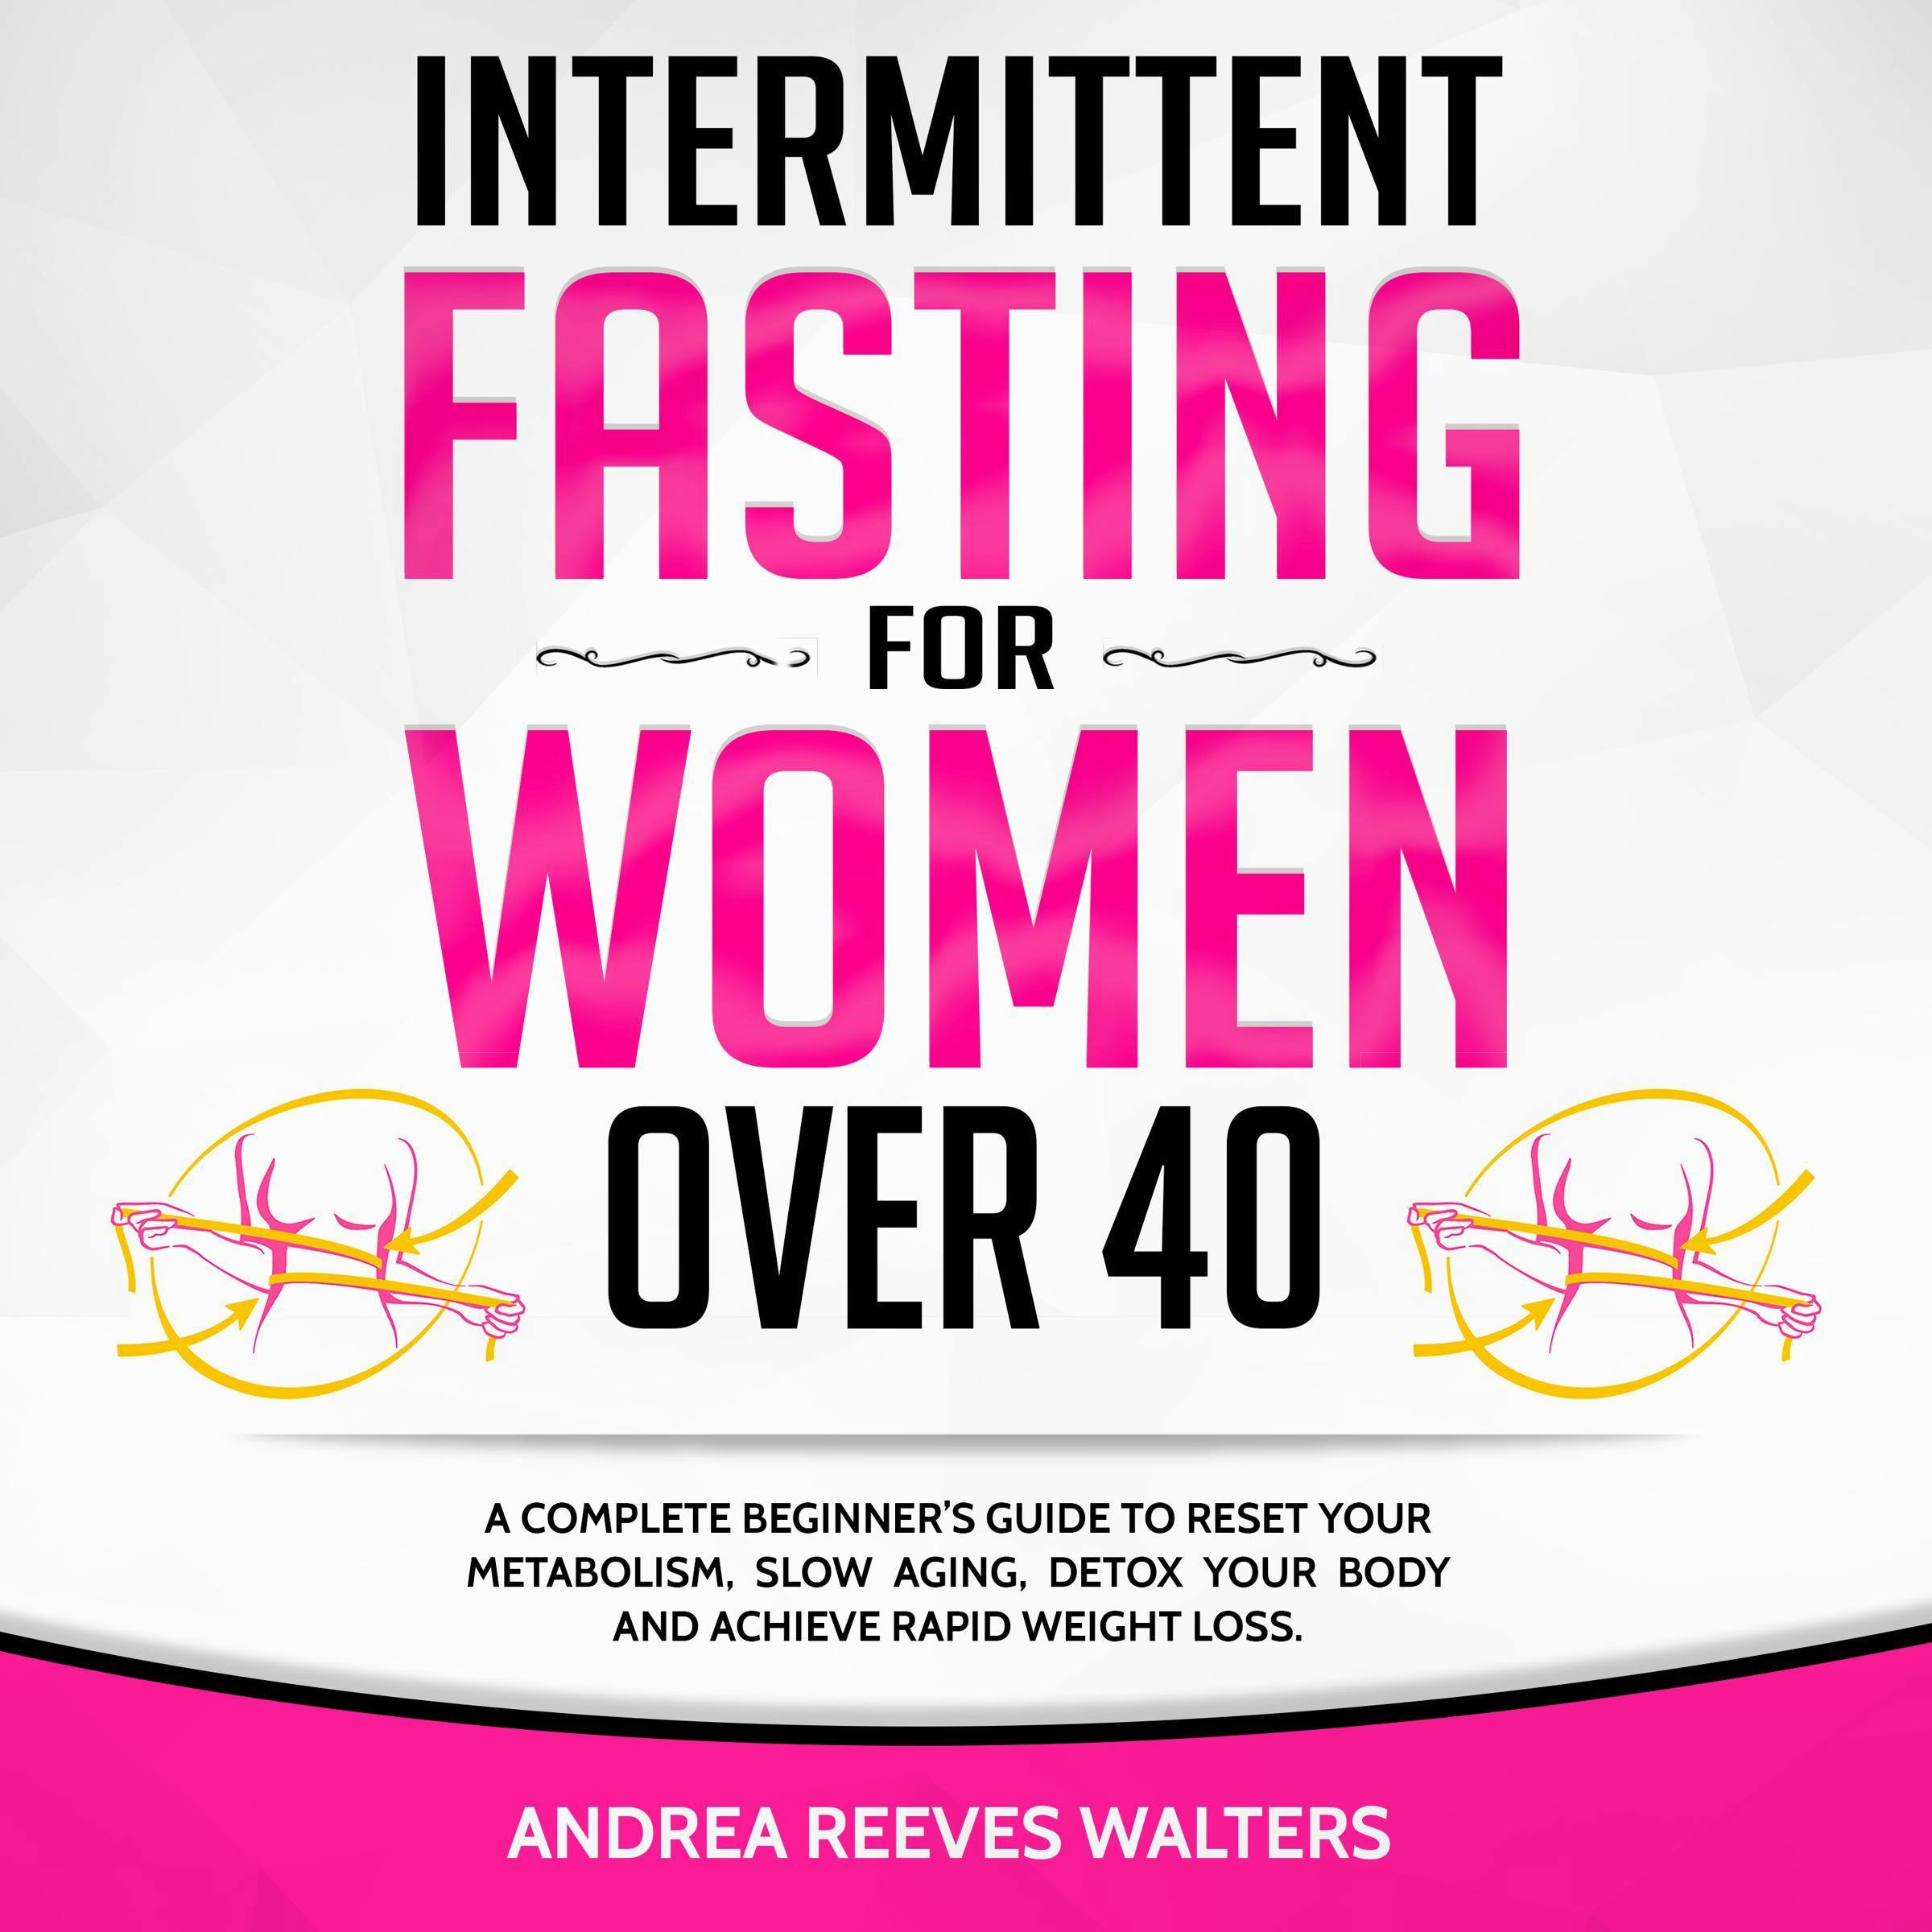 Intermittent Fasting for Women Over 40: A Complete Beginner’s Guide to Reset Your Metabolism, Slow Aging, Detox Your Body and Achieve Rapid Weight Loss - Andrea Reeves Walters